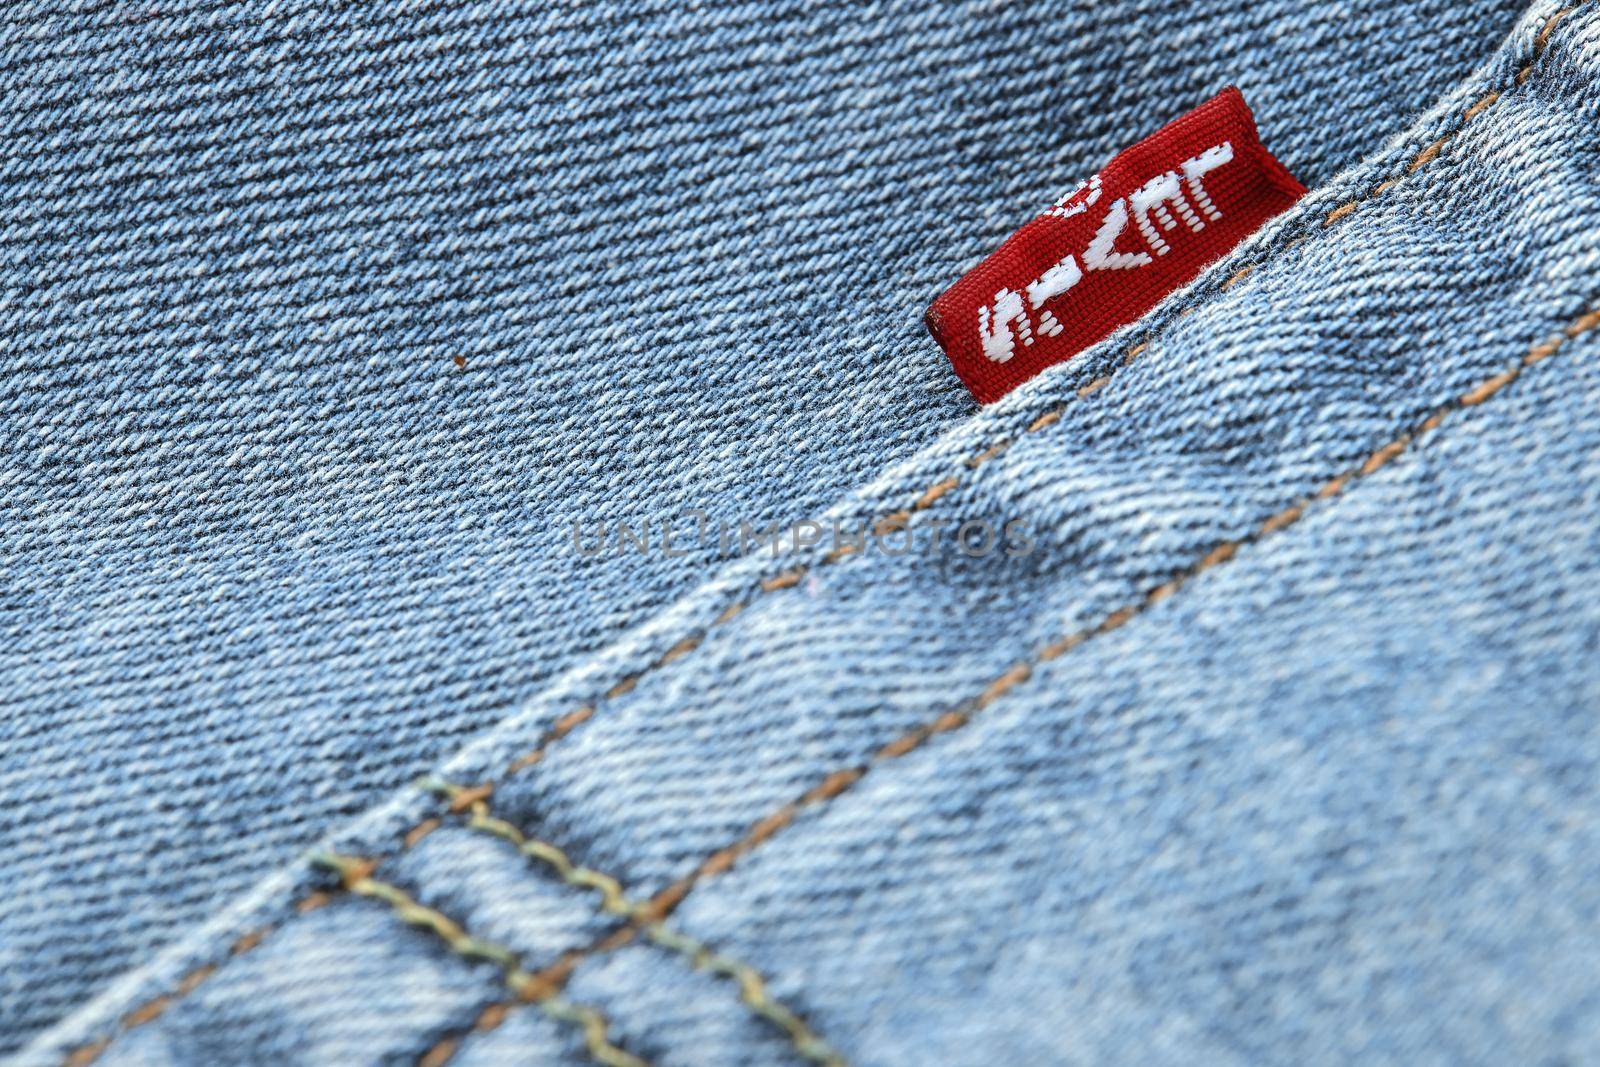 Close up of the details of new LEVI'S 501 Jeans. Seams and denim texture close-up. Classic jeans model. LEVI'S is a brand name of Levi Strauss and Co, founded in 1853. 31.12.2021, Rostov, Russia.